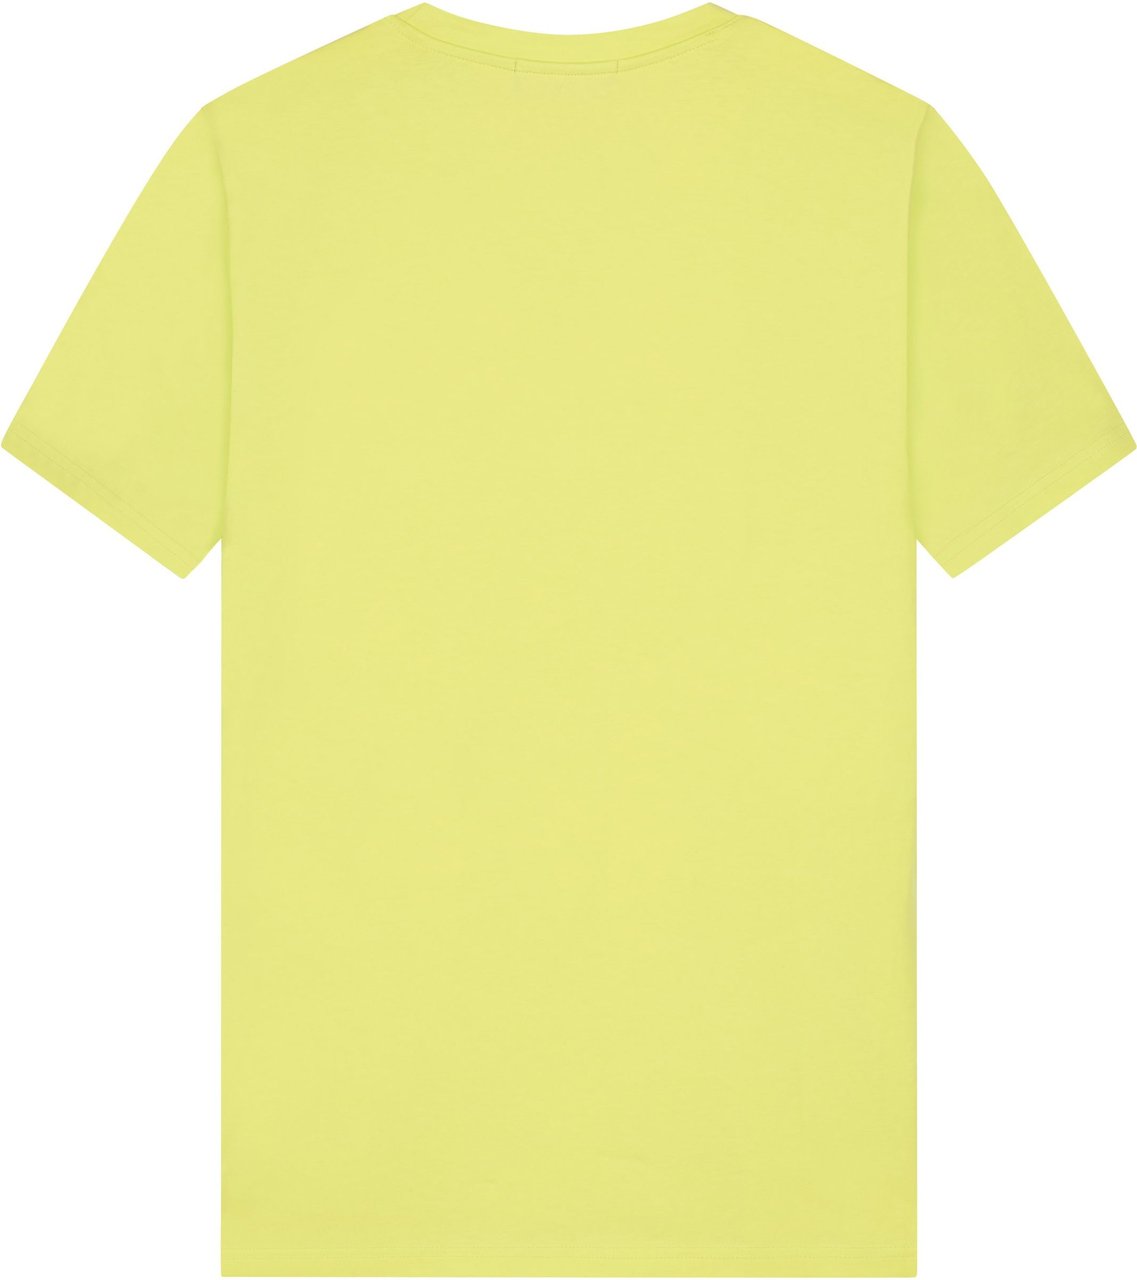 Malelions Sew T-Shirt - Lime Geel